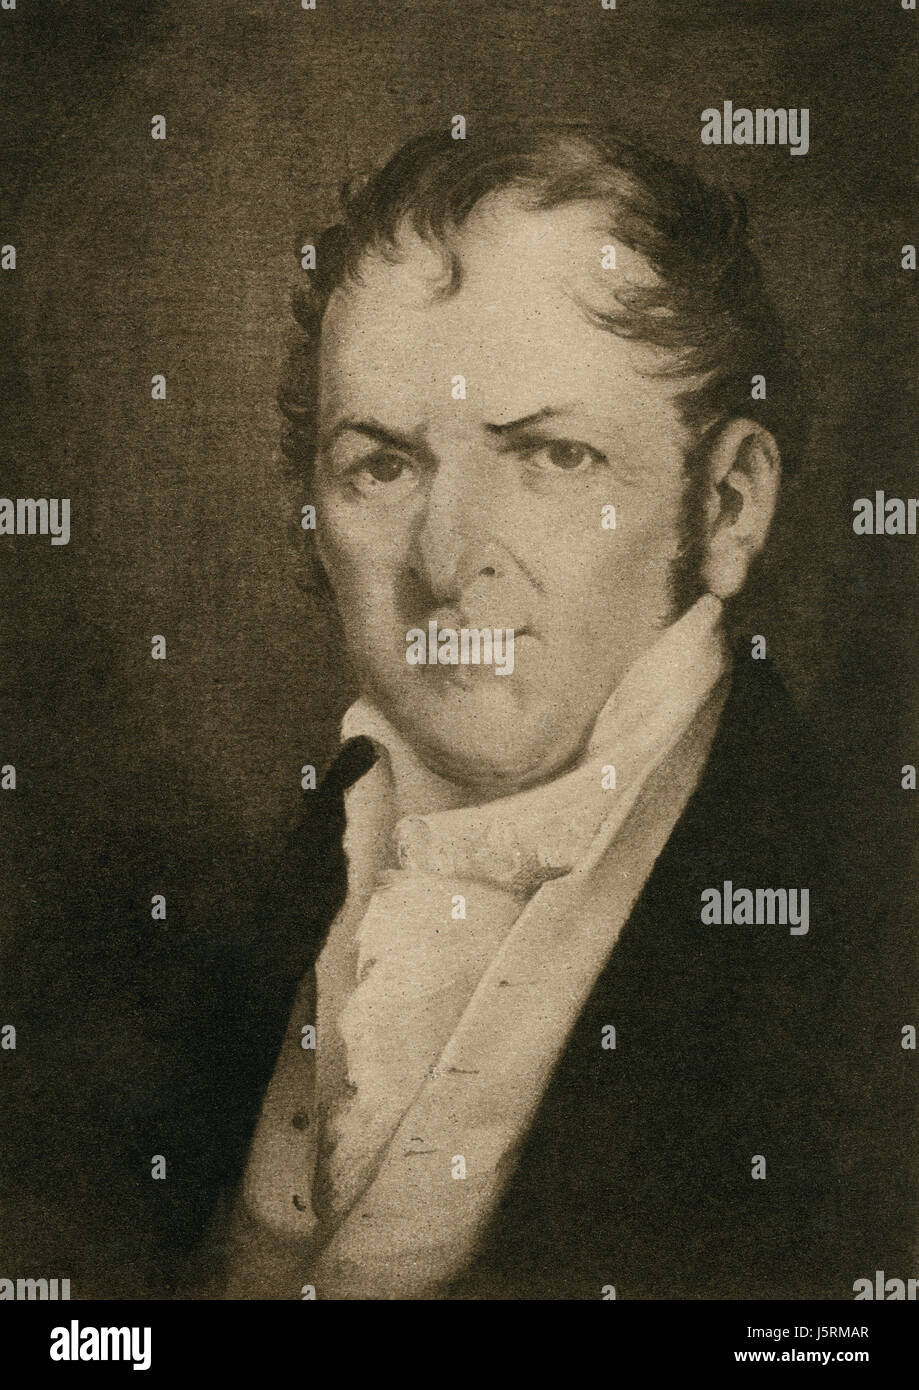 Eli Whitney (1765-1825), American Inventor Best Known for Inventing the Cotton Gin, Portrait, Engraving Stock Photo